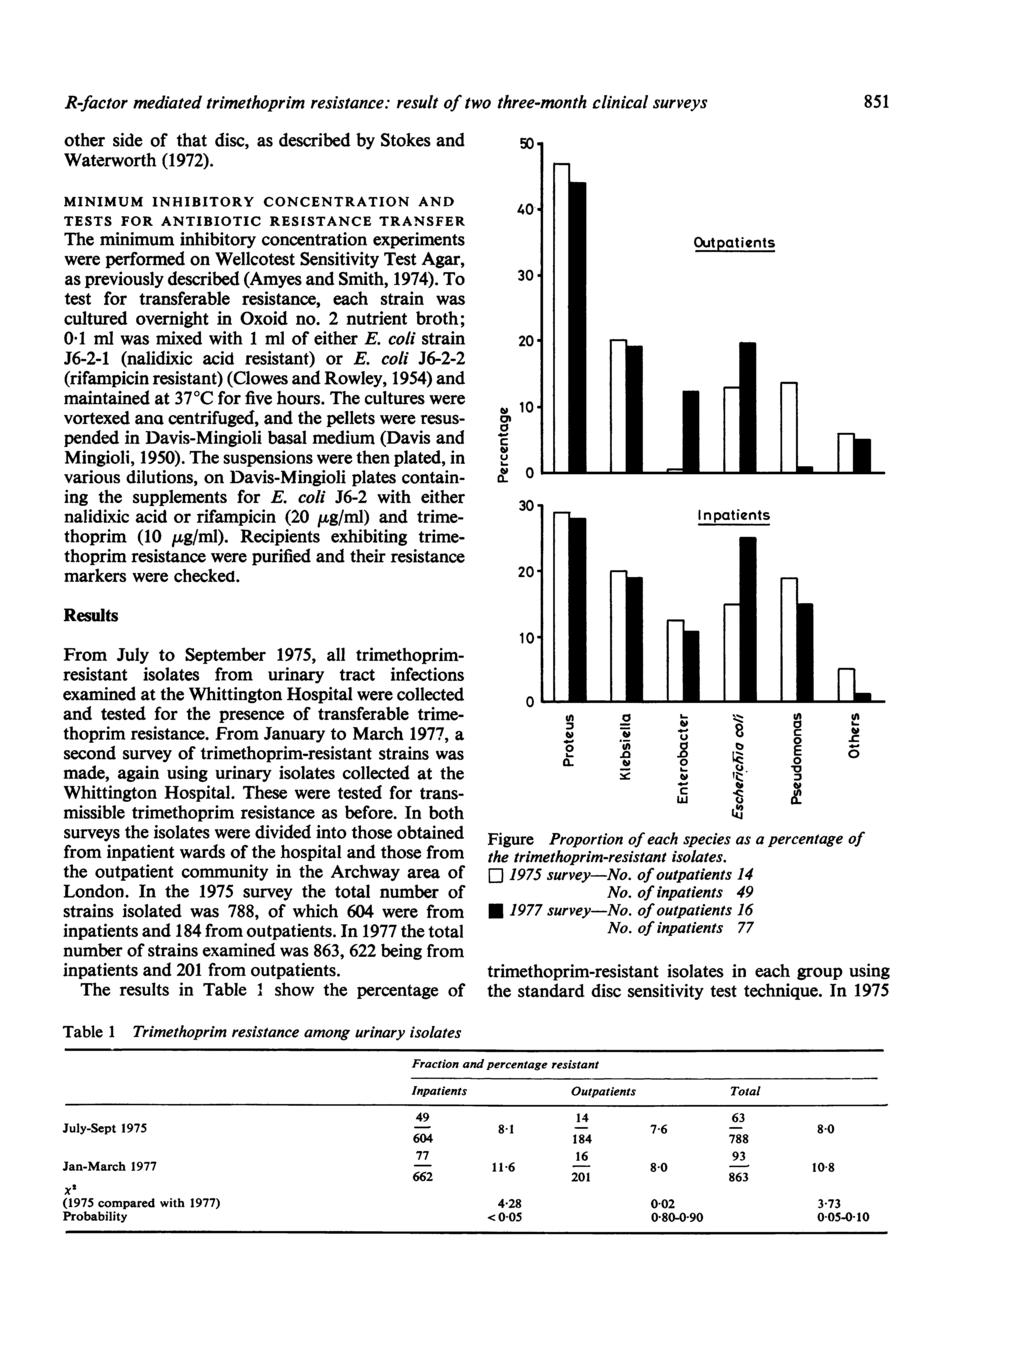 R-factor mediated trimethoprim resistance: result of two three-month clinical surveys other side of that disc, as described by Stokes and Waterworth (1972).